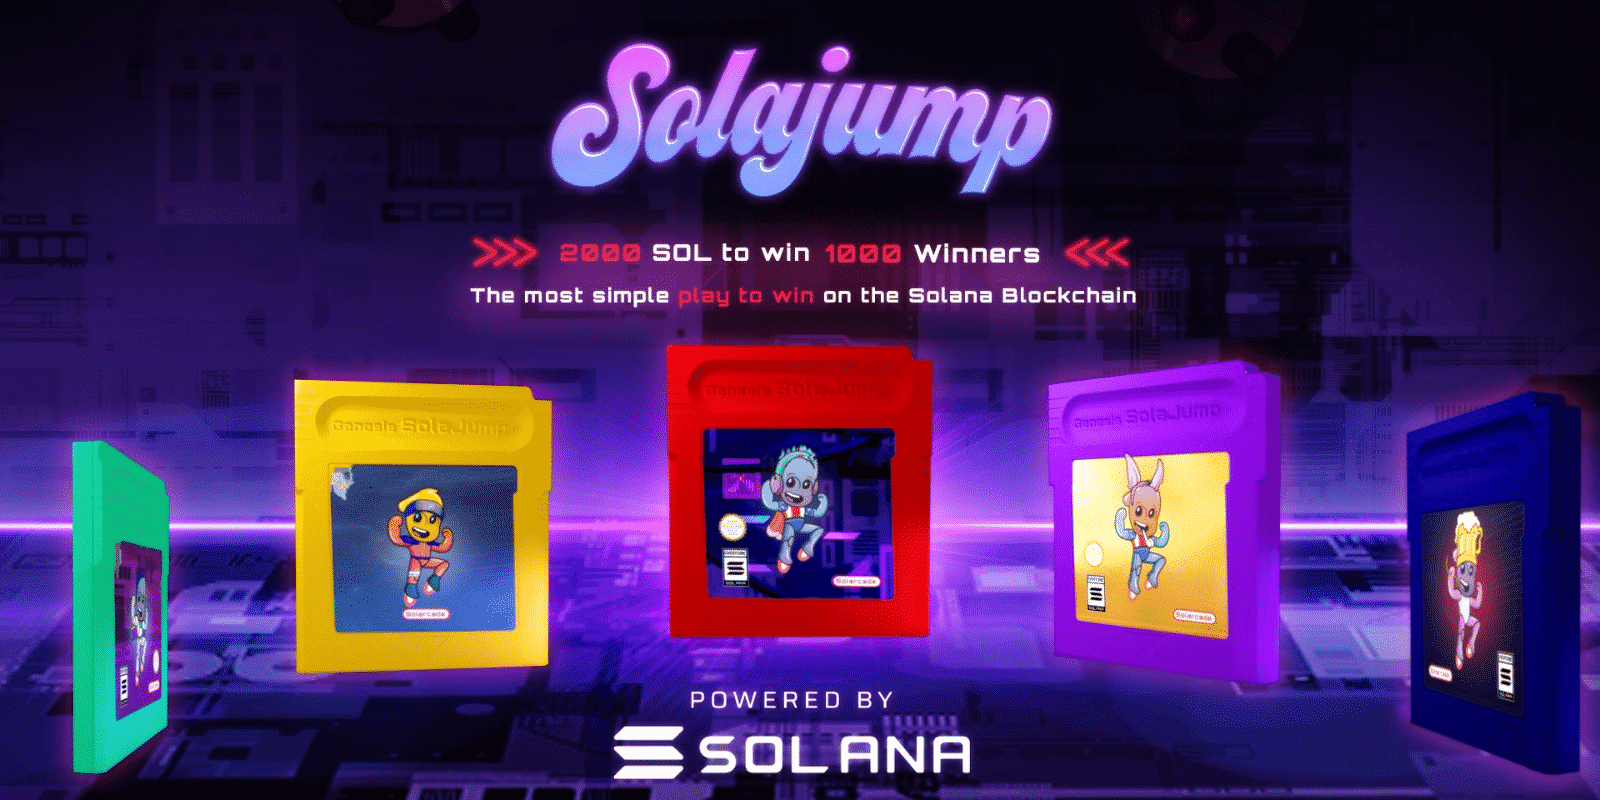 Solajump, the new gem of the NFT short gaming trend